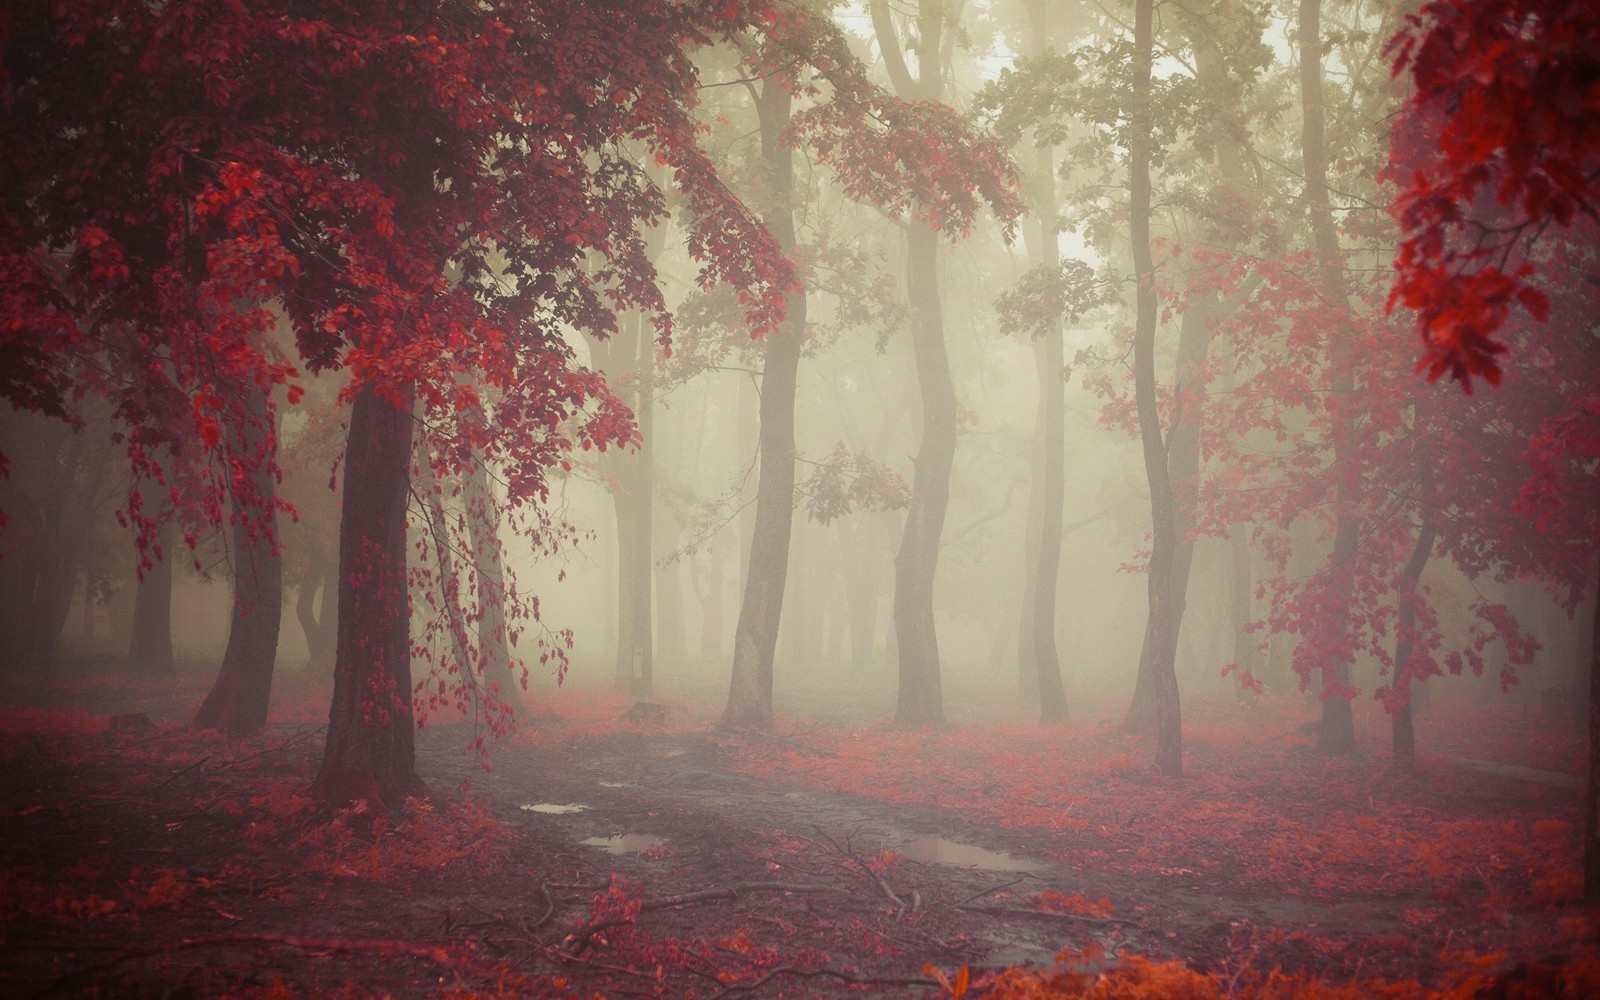 mist, Fall, Morning, Nature, Leaves, Red, Path, Trees, Rain, Landscape Wallpaper